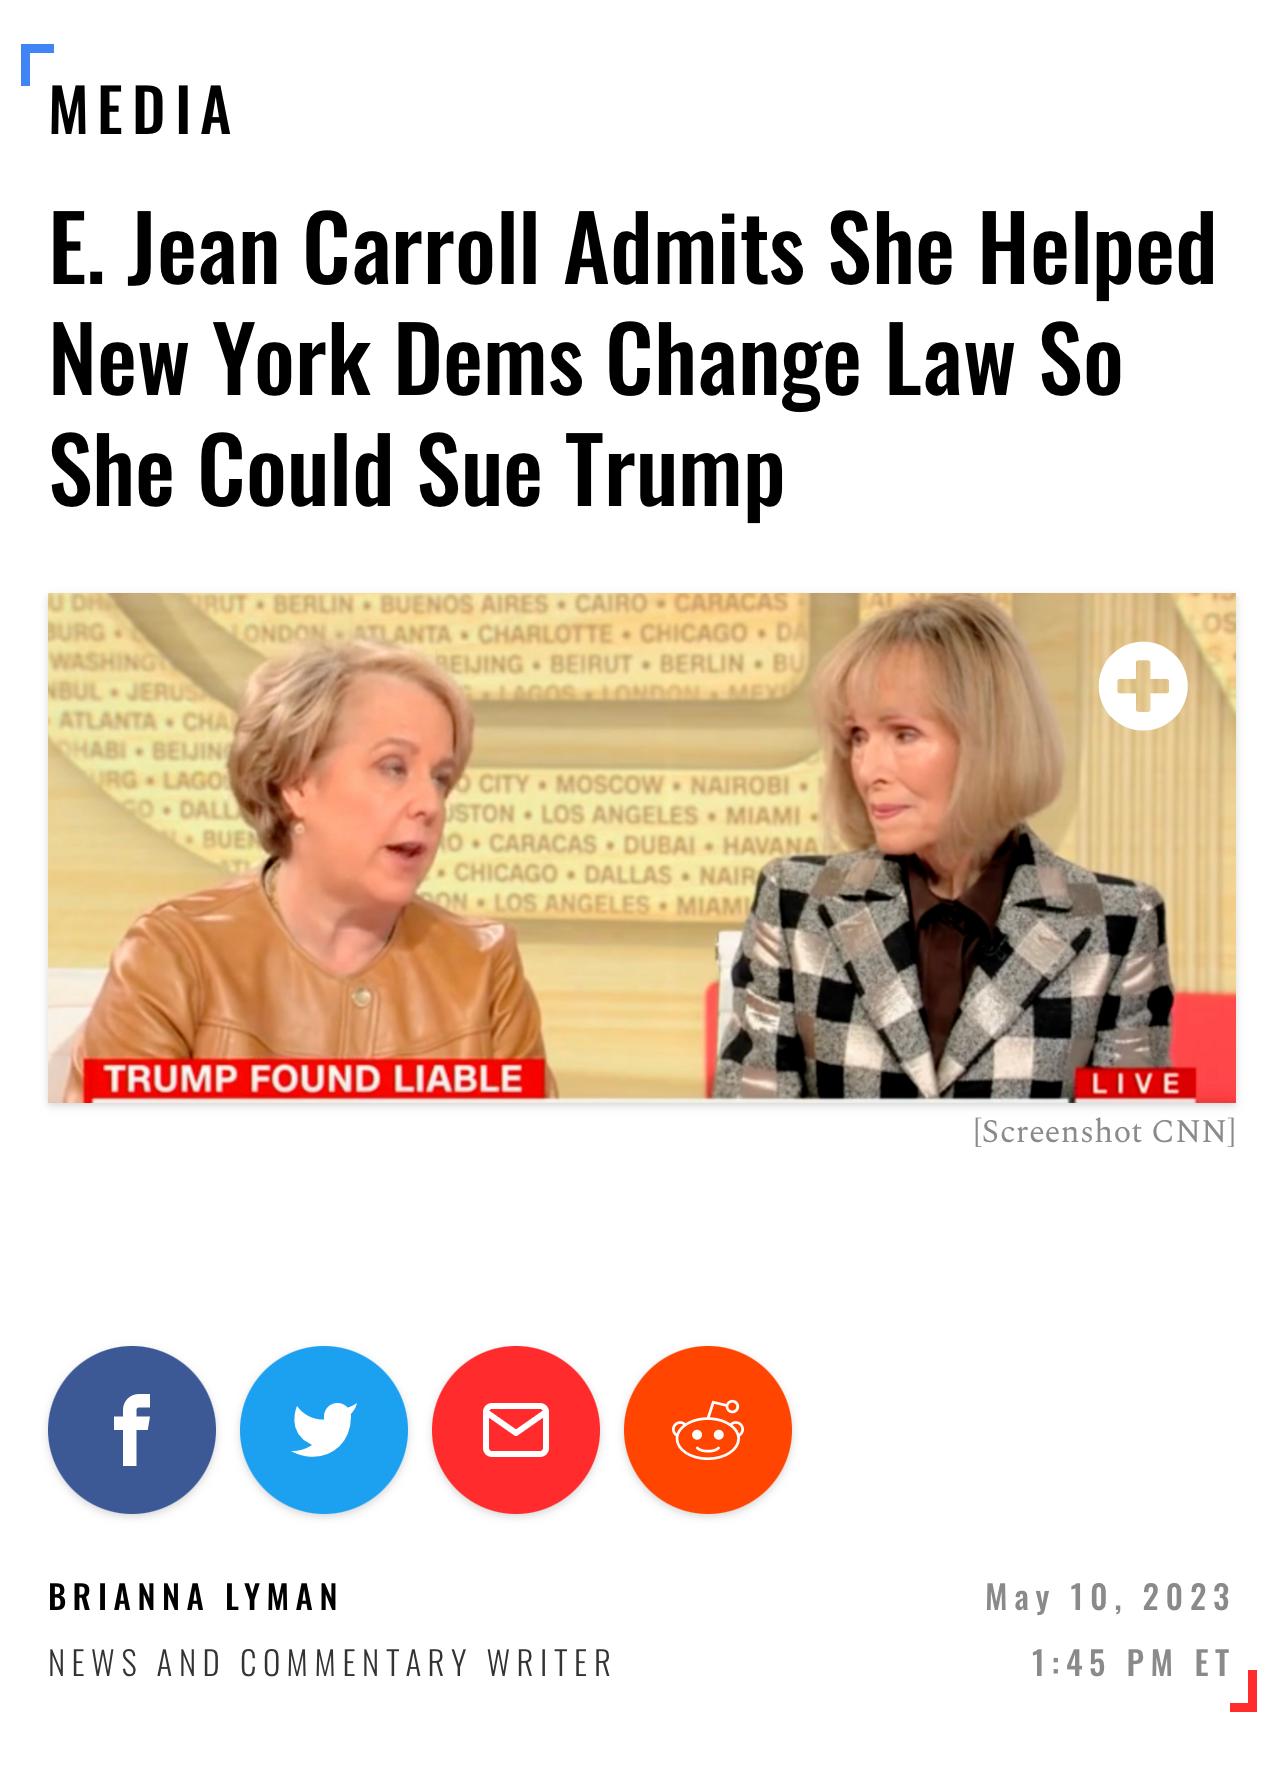 Jean Carroll’s lawyer bragged about helping push New York law that allowed her to sue Trump – The Donald – America First